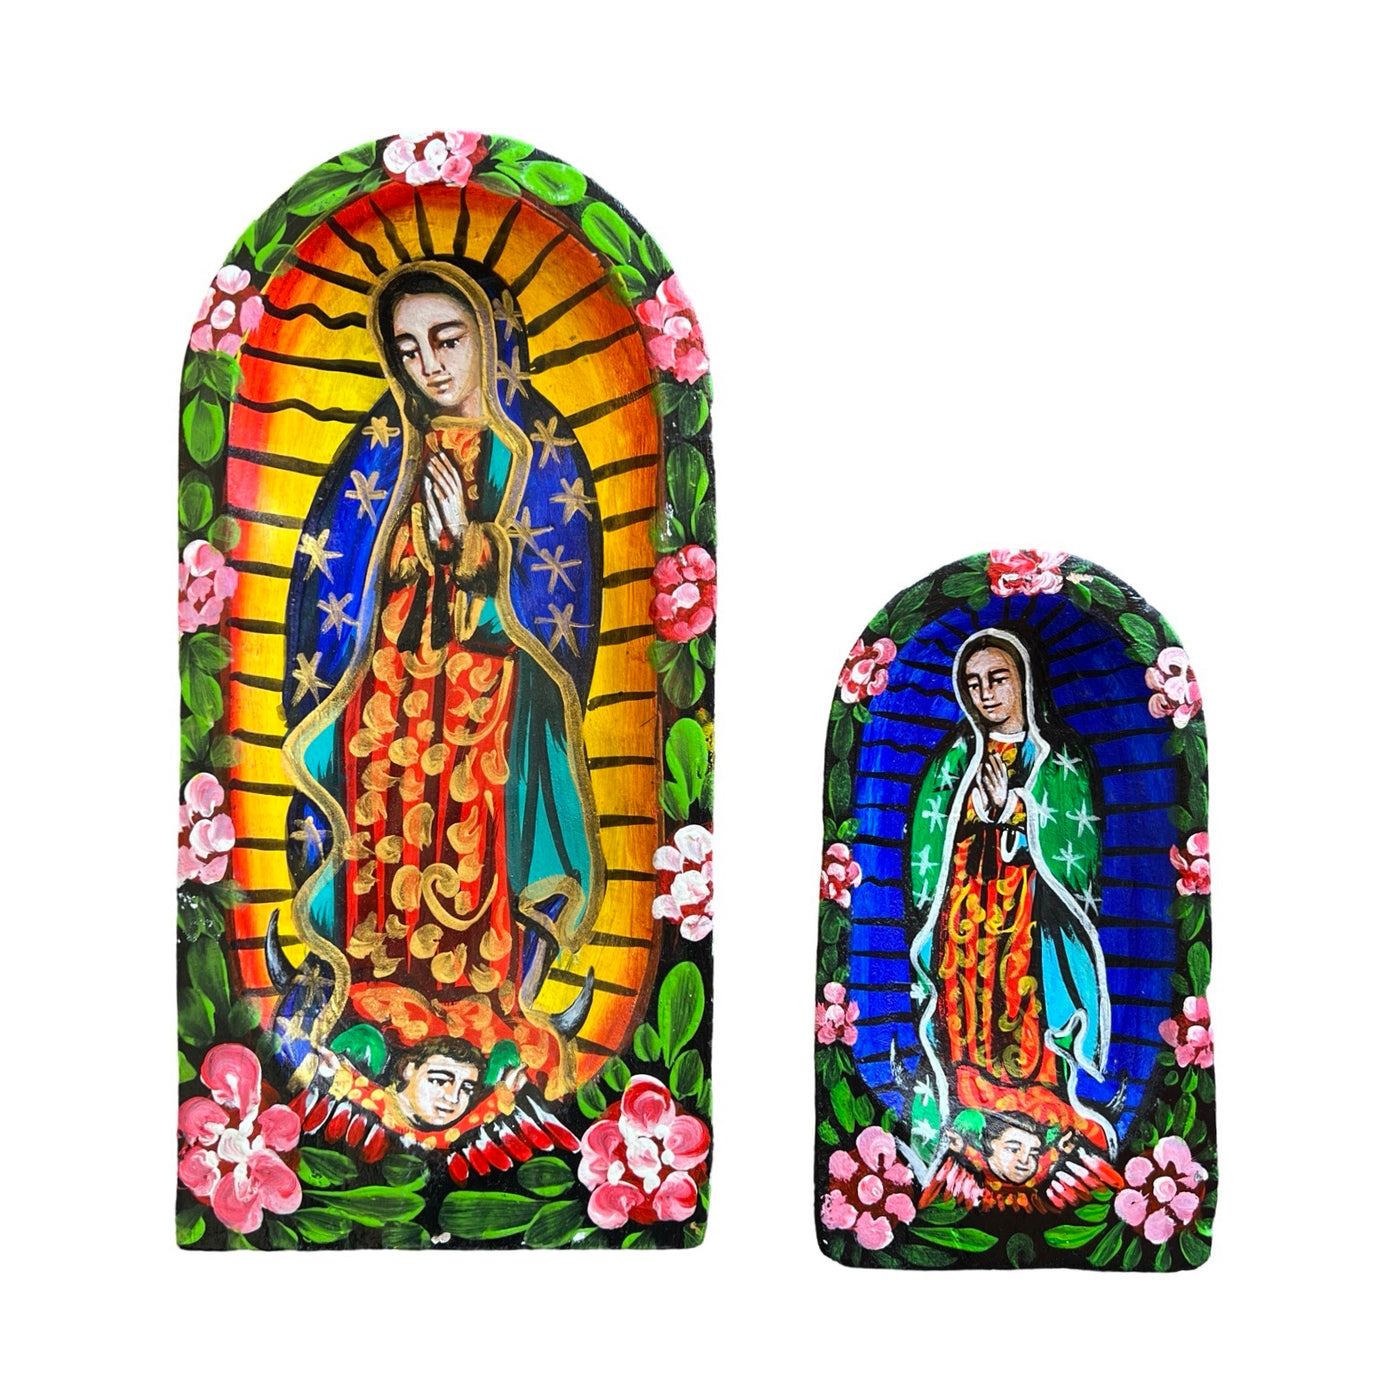 Set of a wooden batea handpainted with an image of the VIrgin Mary